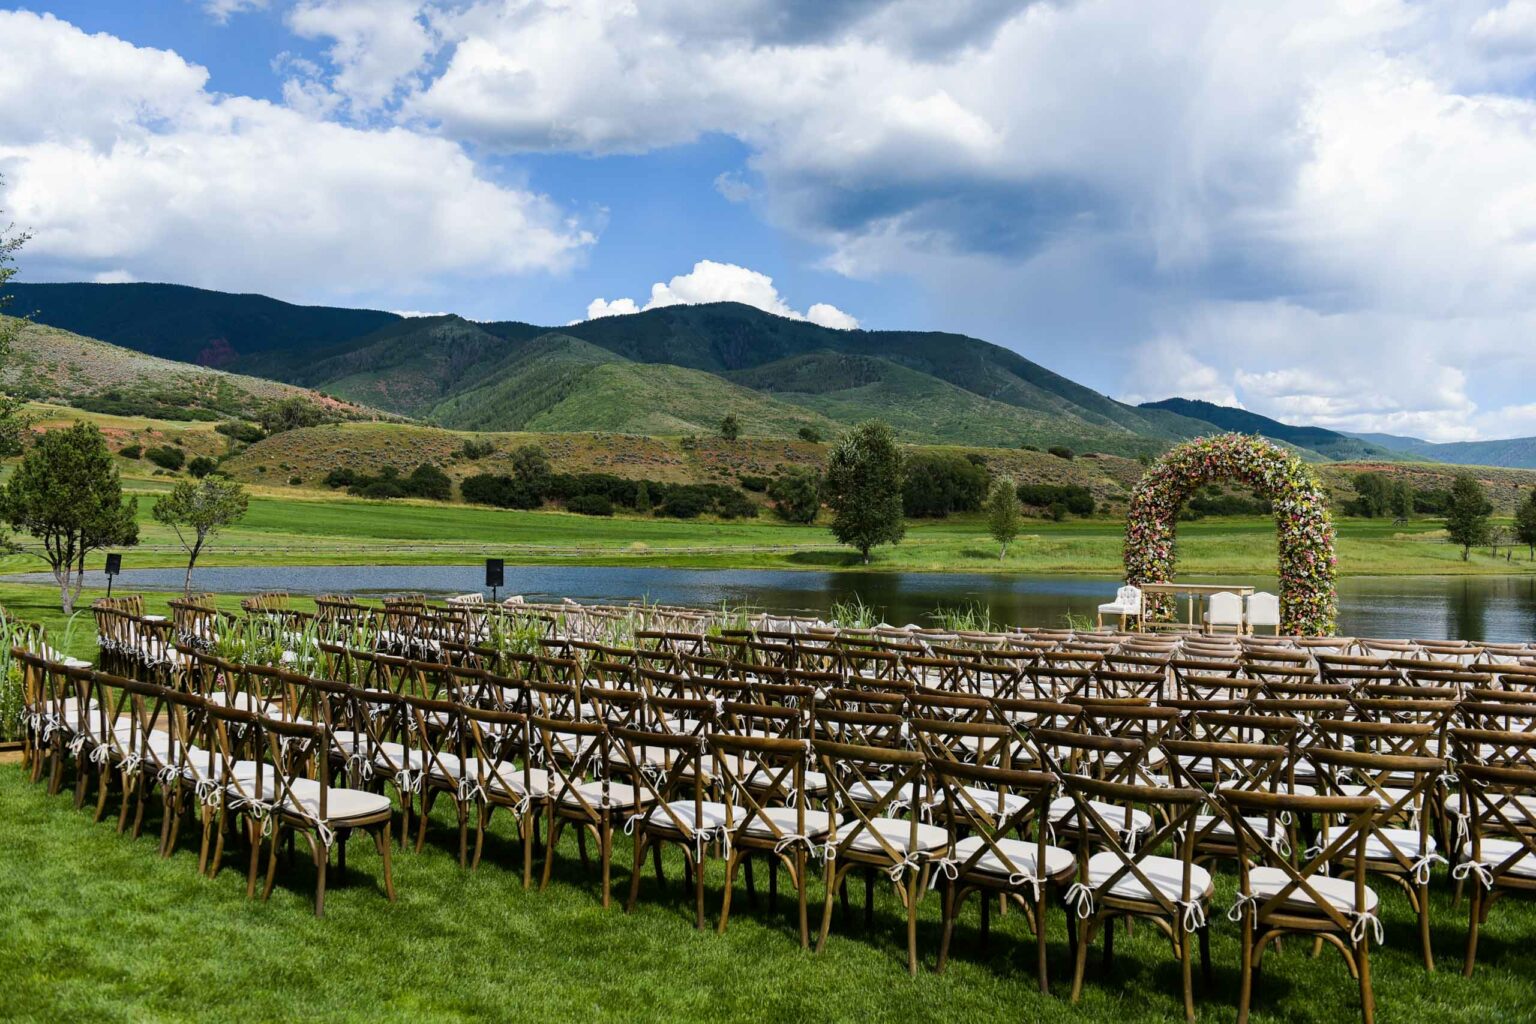 chairs set out for a wedding ceremony outside next to a lake with a floral arch.